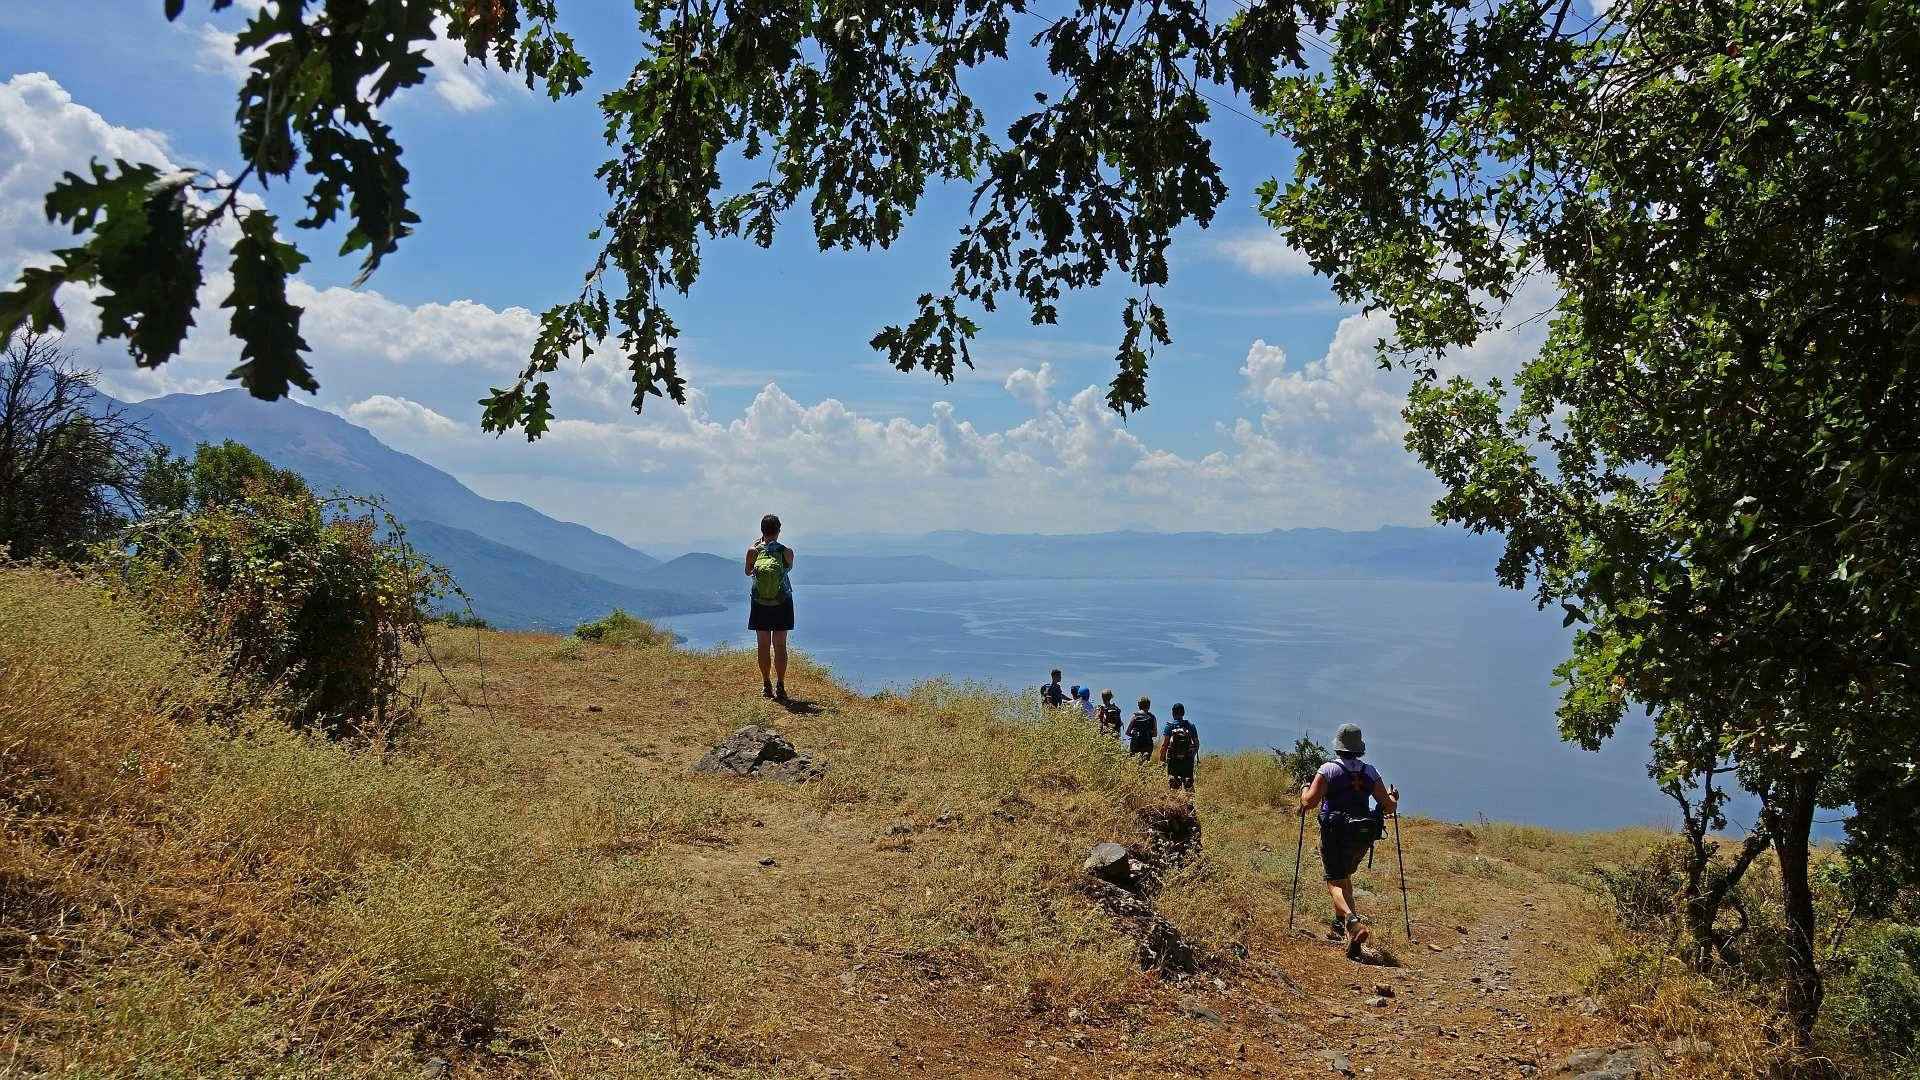 Mountain hike with beach afternoon lake Ohrid